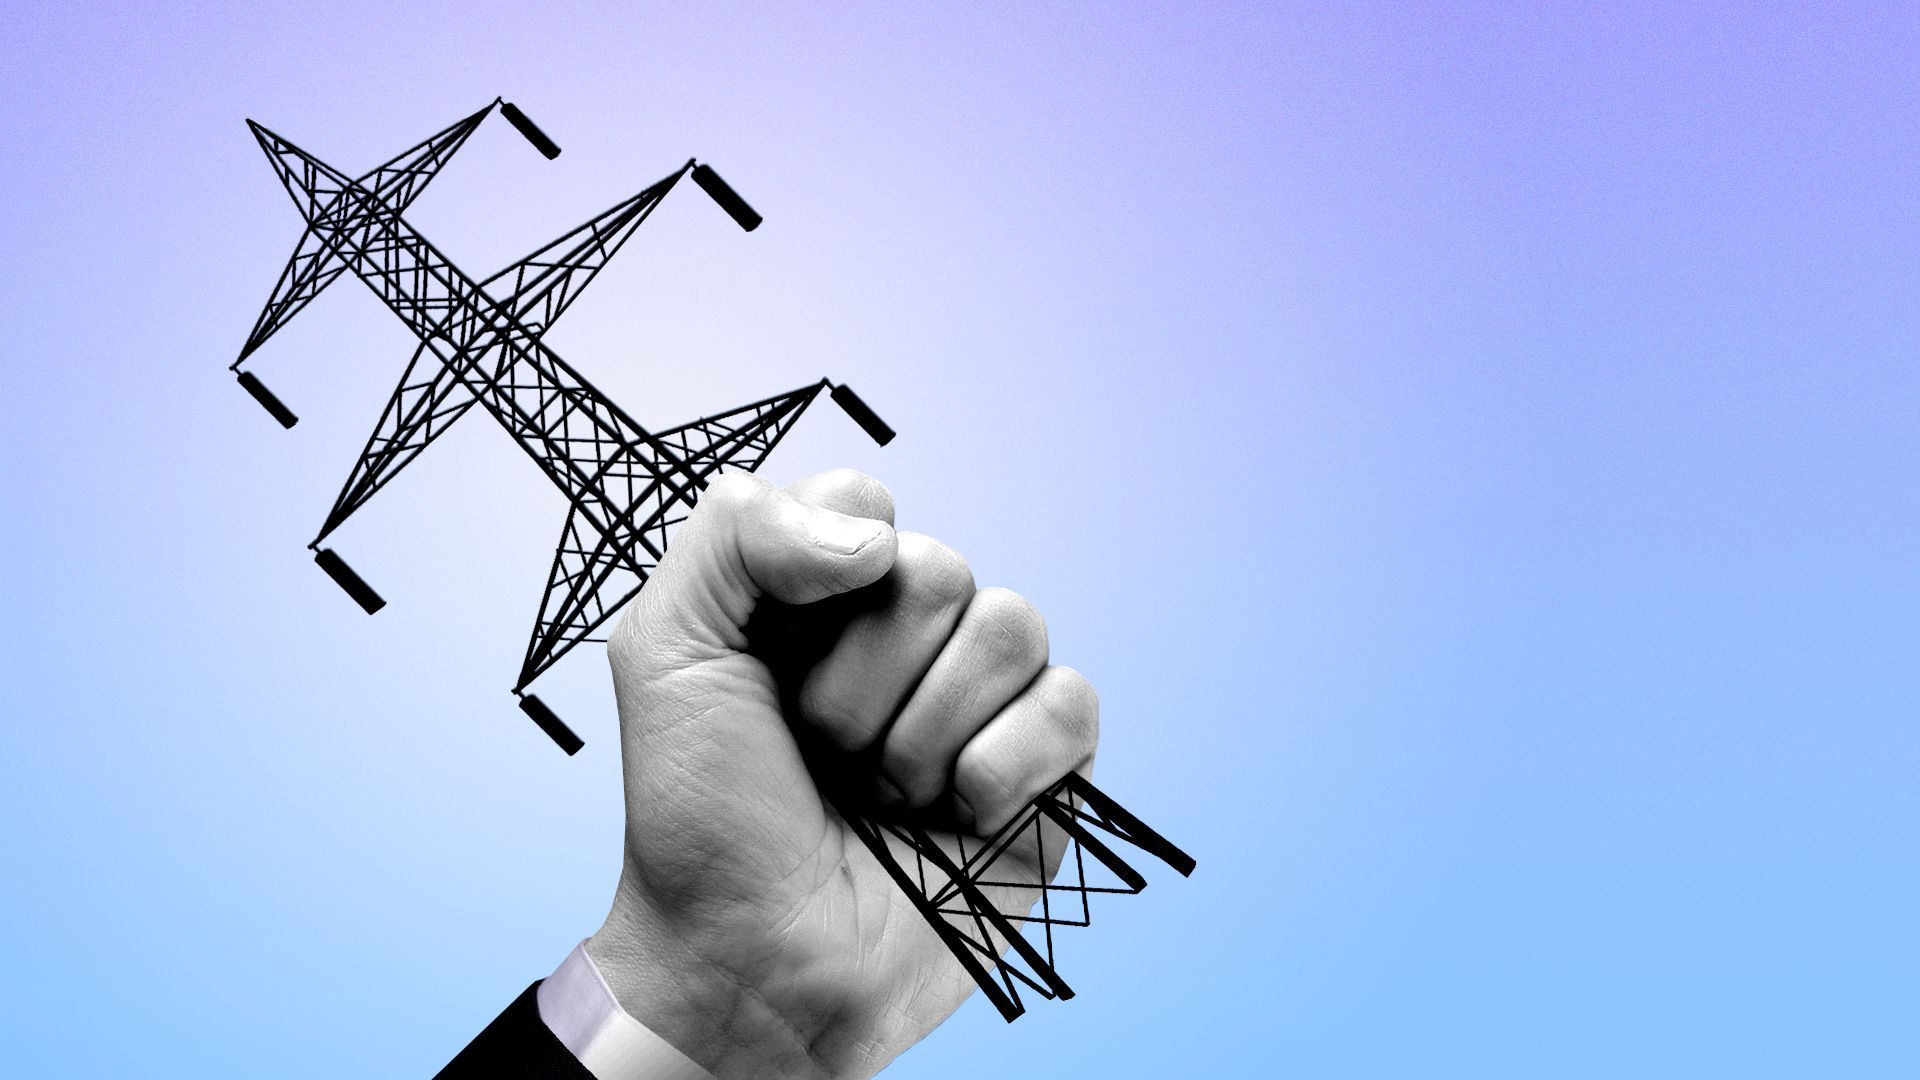 Illustration of a hand gripping and holding high a transmission line structure